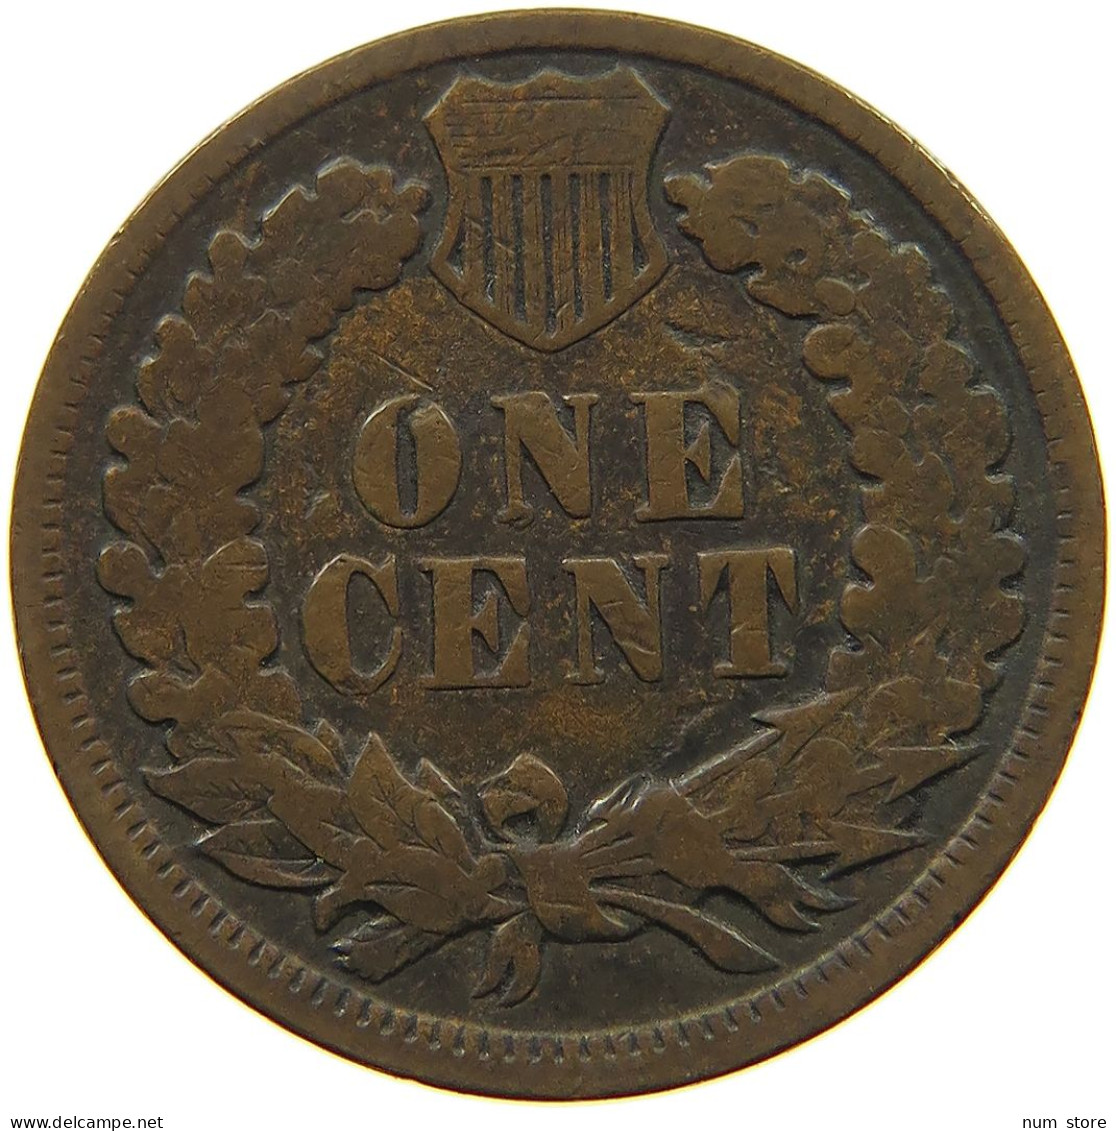 UNITED STATES OF AMERICA CENT 1891 INDIAN HEAD #c013 0123 - 1859-1909: Indian Head